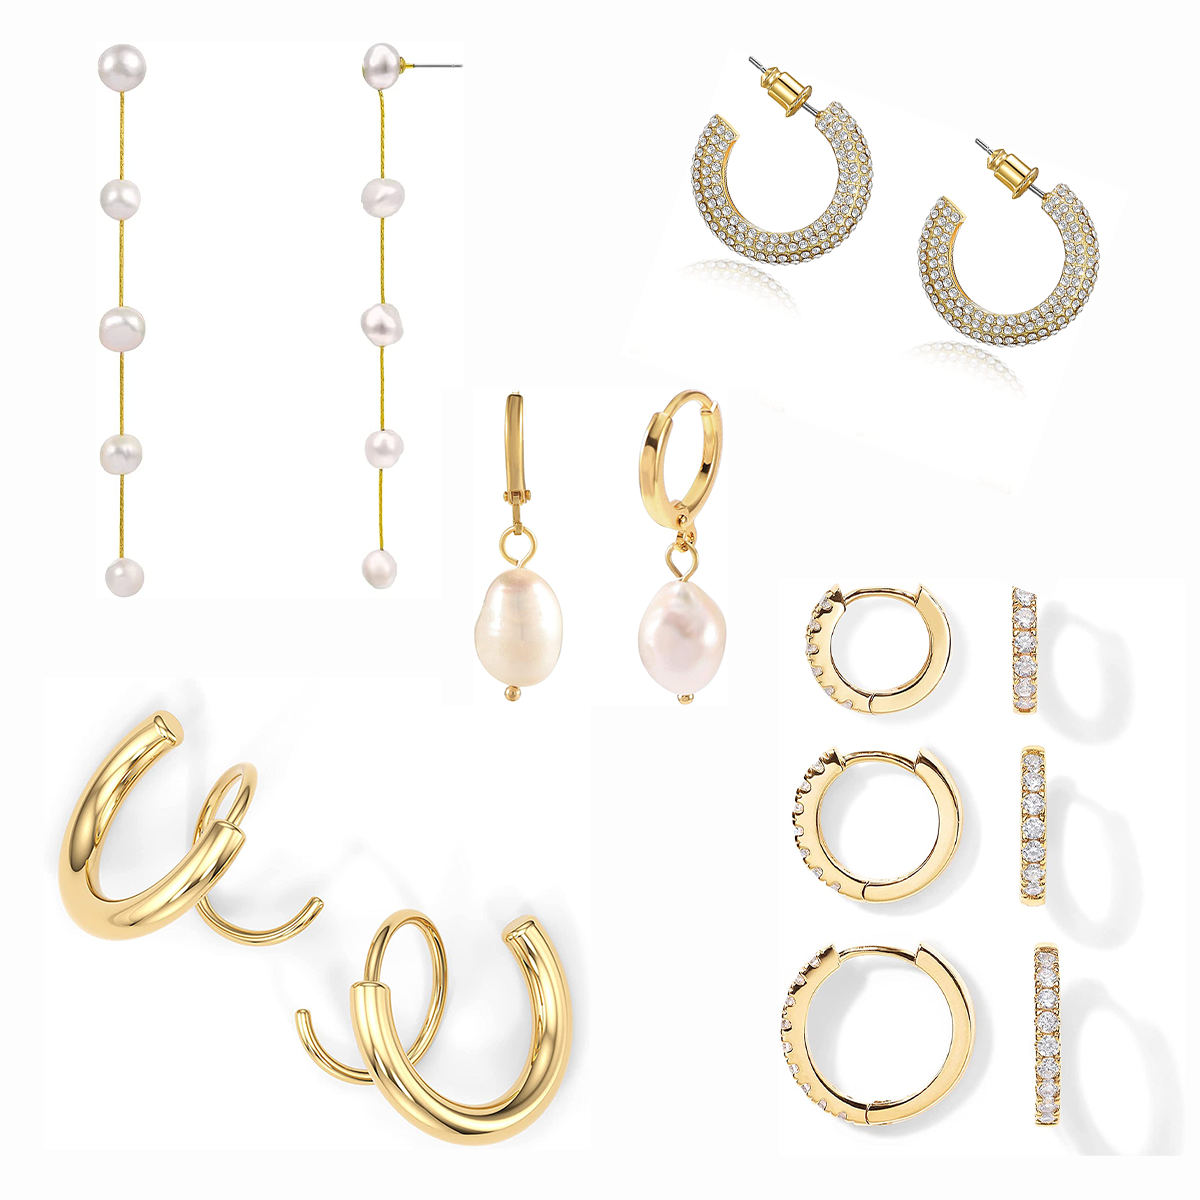 13 Gold Hoop Earrings To Polish Up Your Look